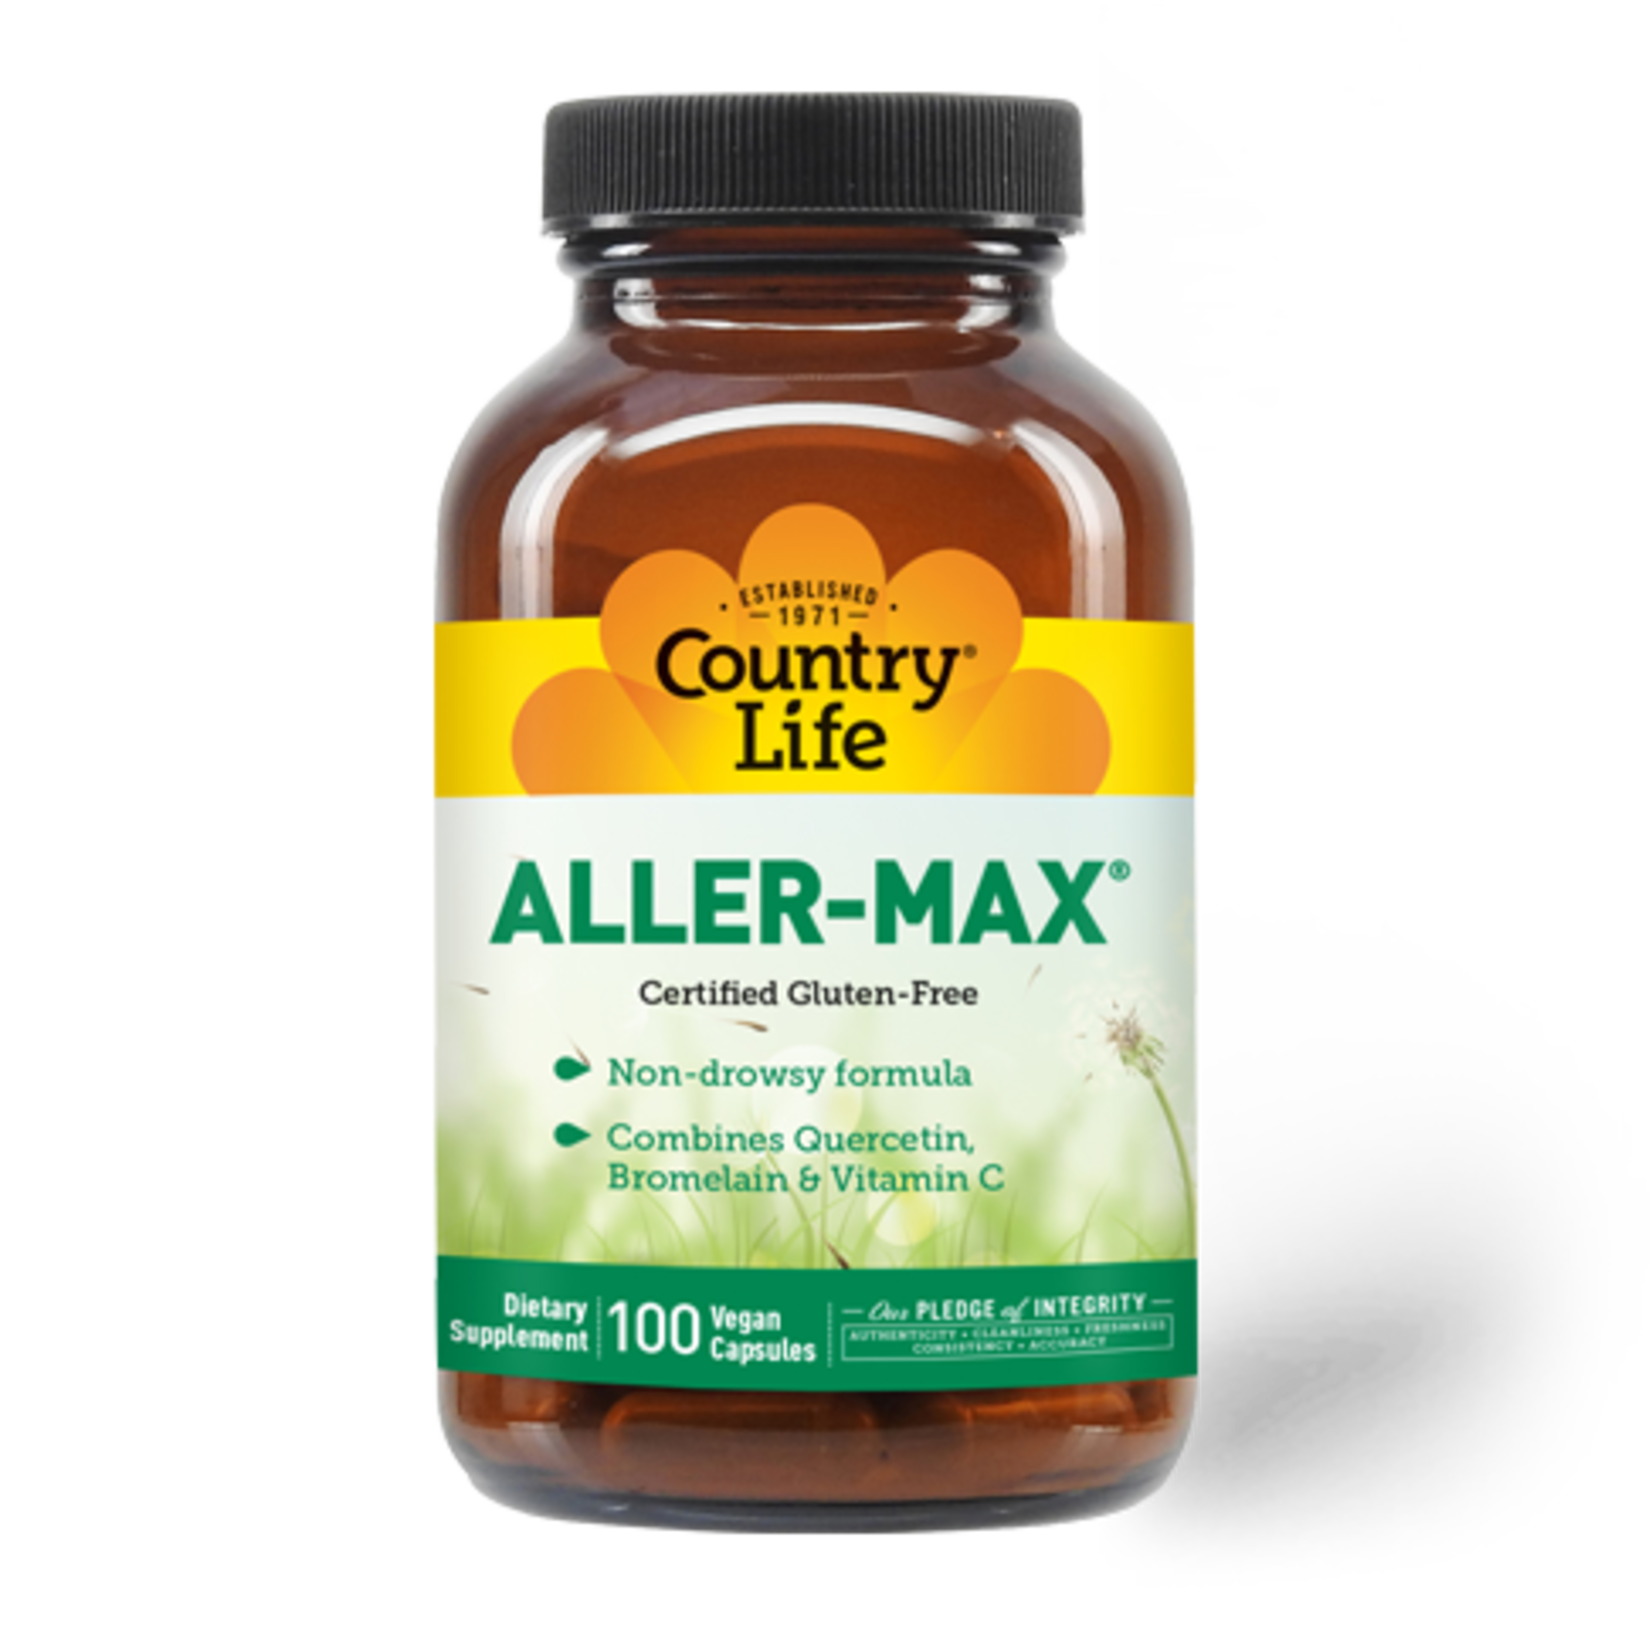 Country Life Country Life - Aller Max - 100 Tablets